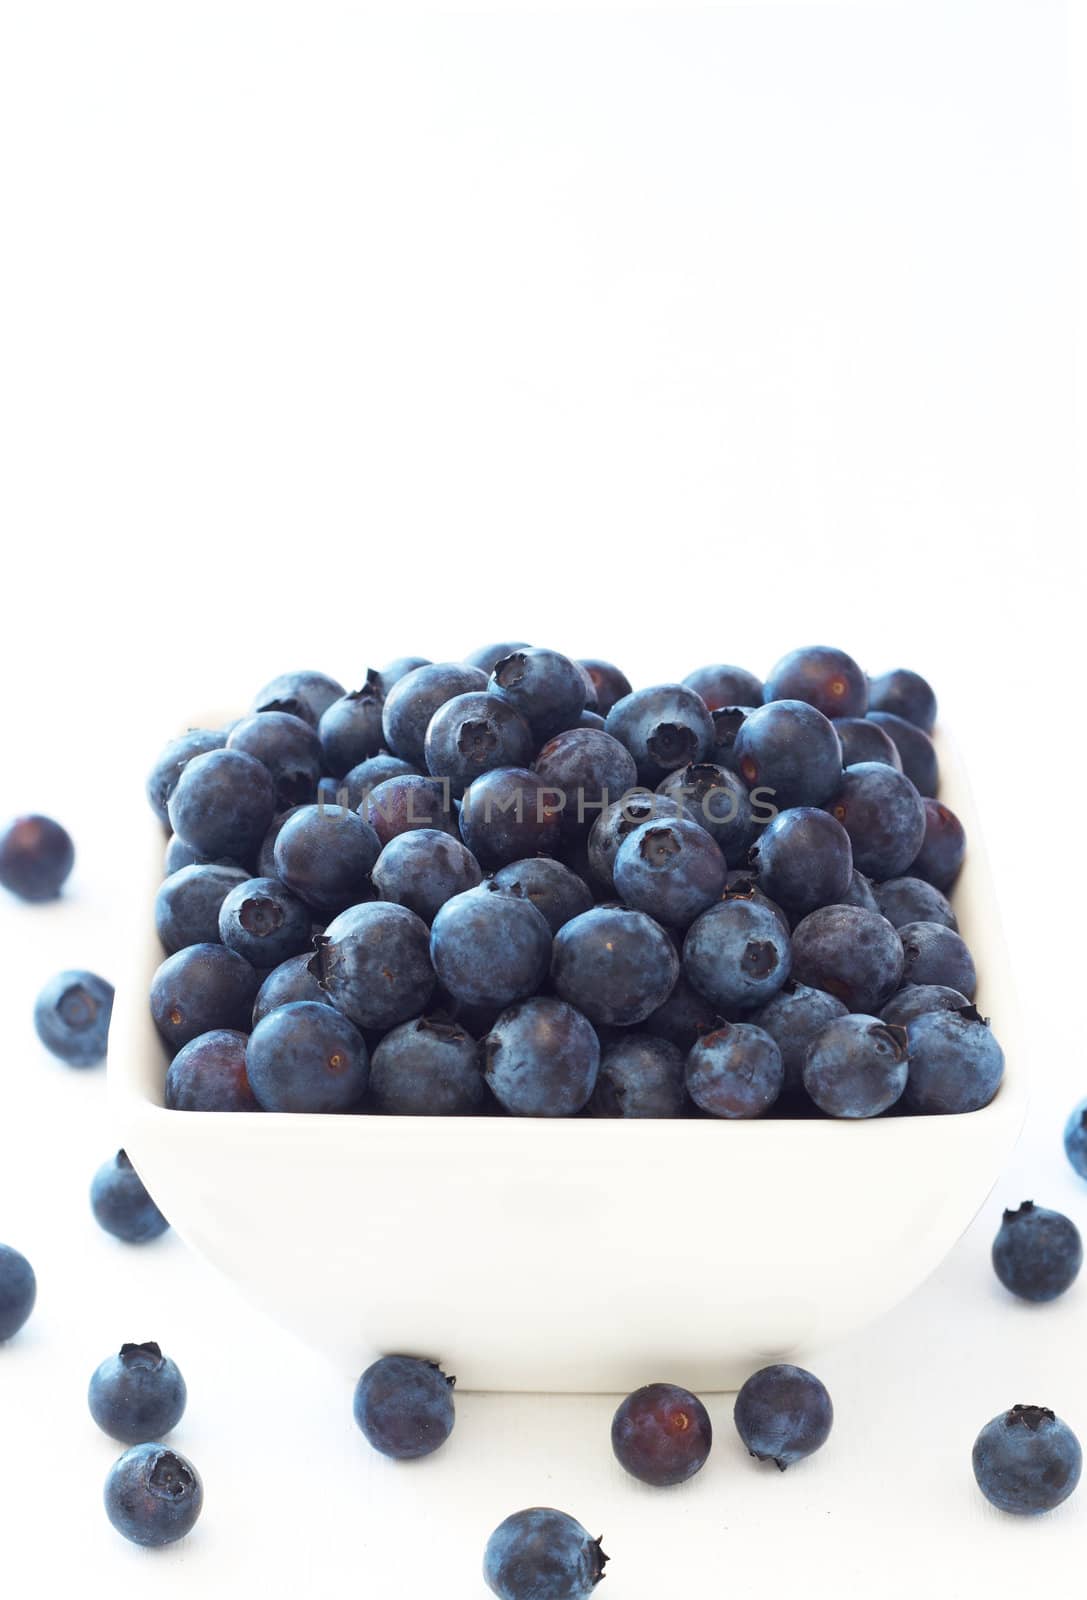 Bunch of fresh blueberries in ceramic bowl on white background